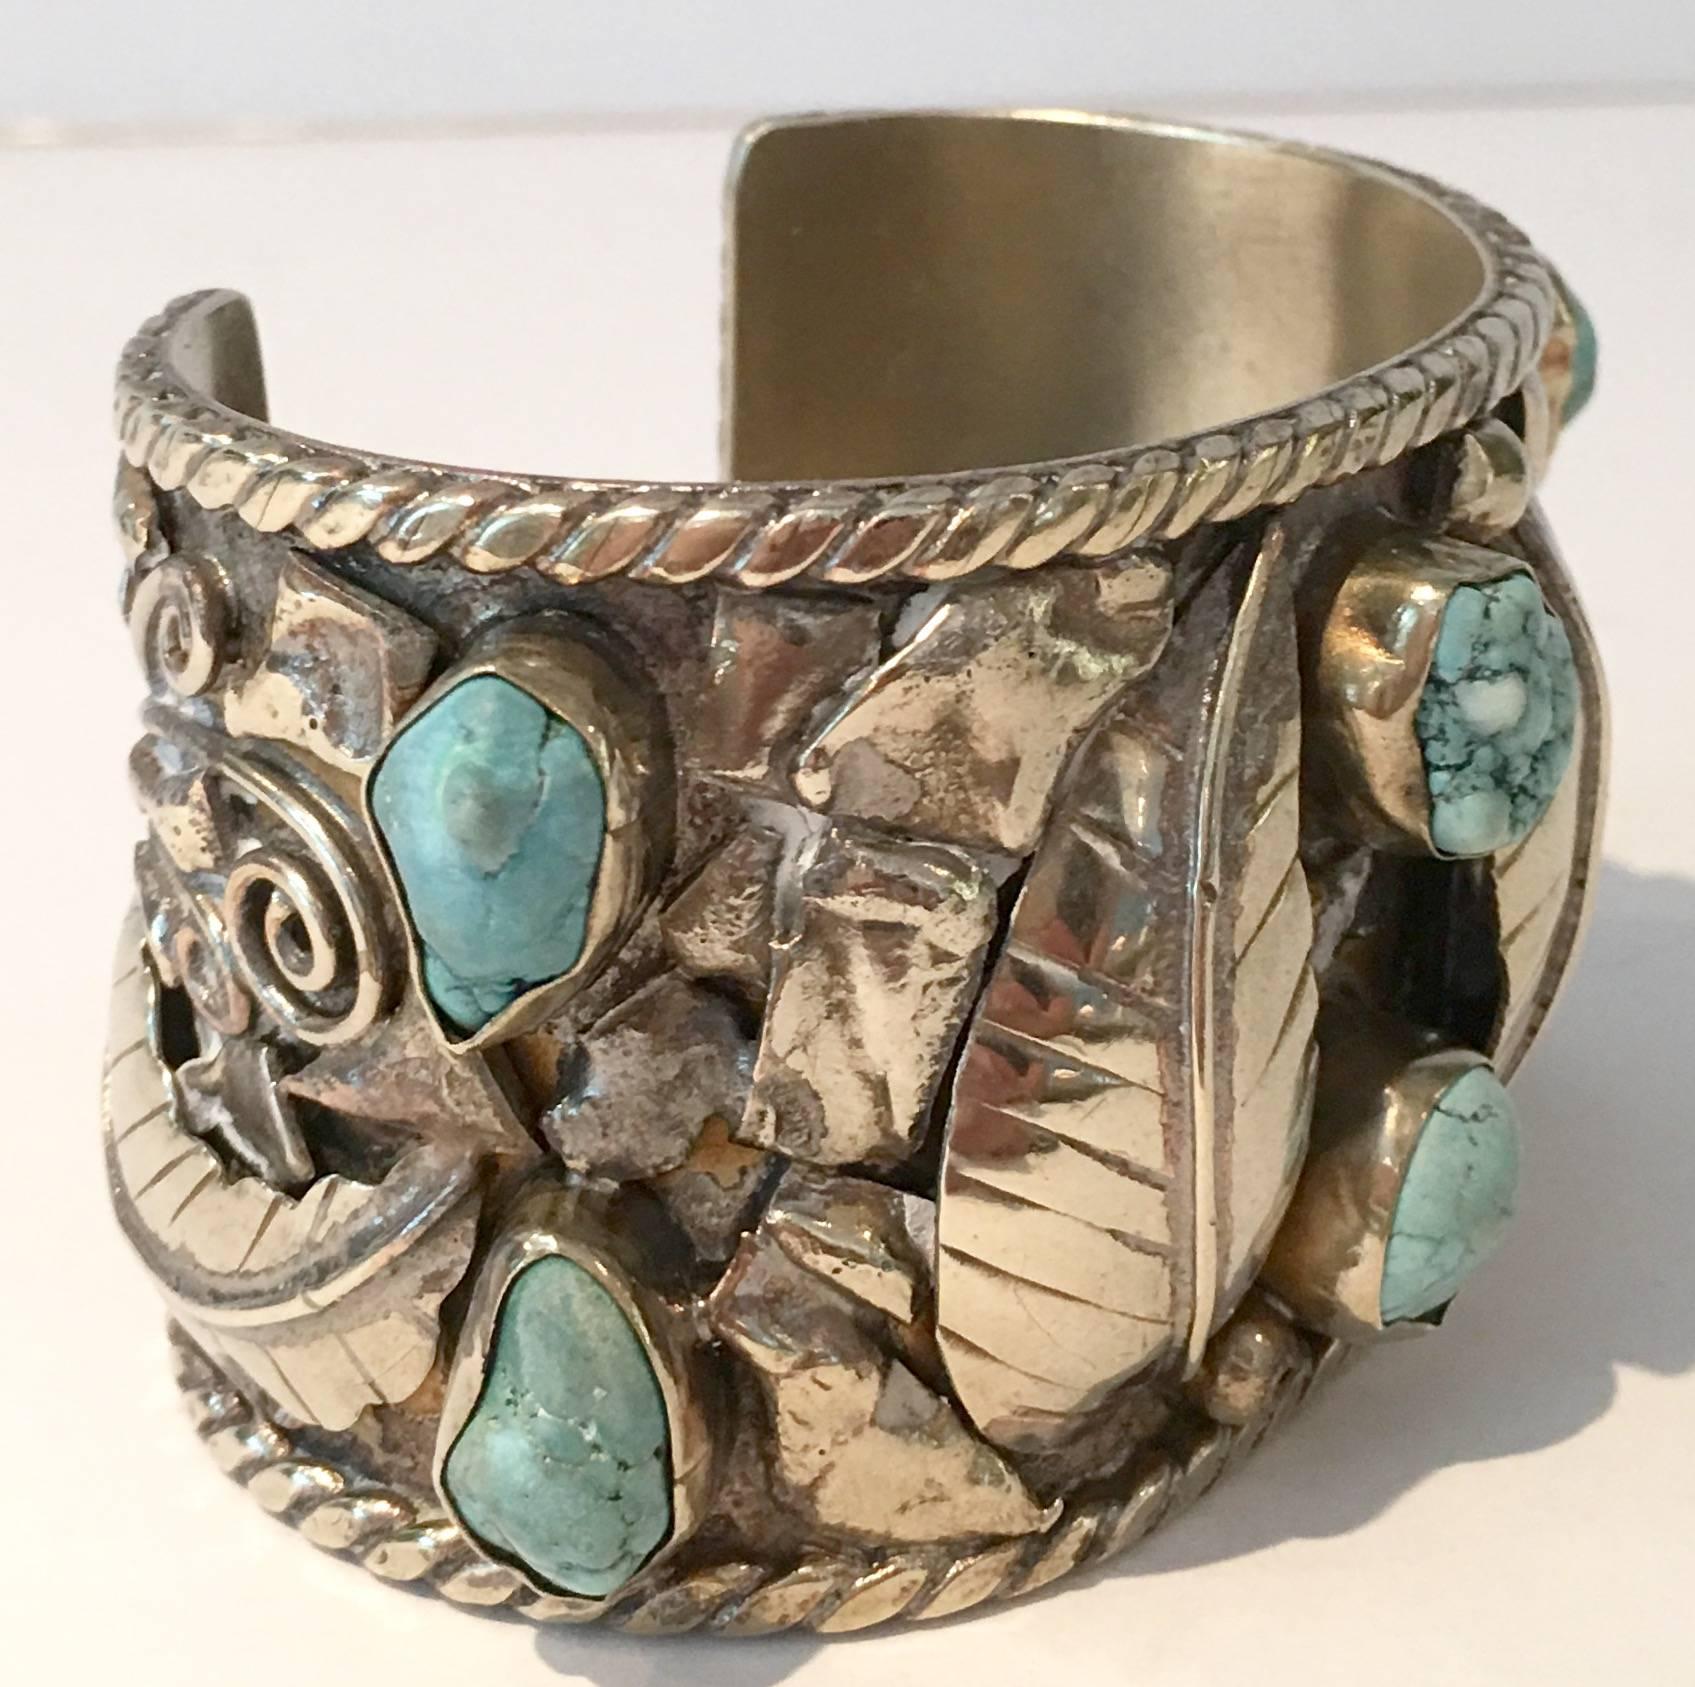 Incredible and unique Mid-Century Native American sterling silver and six turquoise cabochon set stones over nickel silver cuff bracelet. Each turquoise stone is approximately. Measures: 25-.50